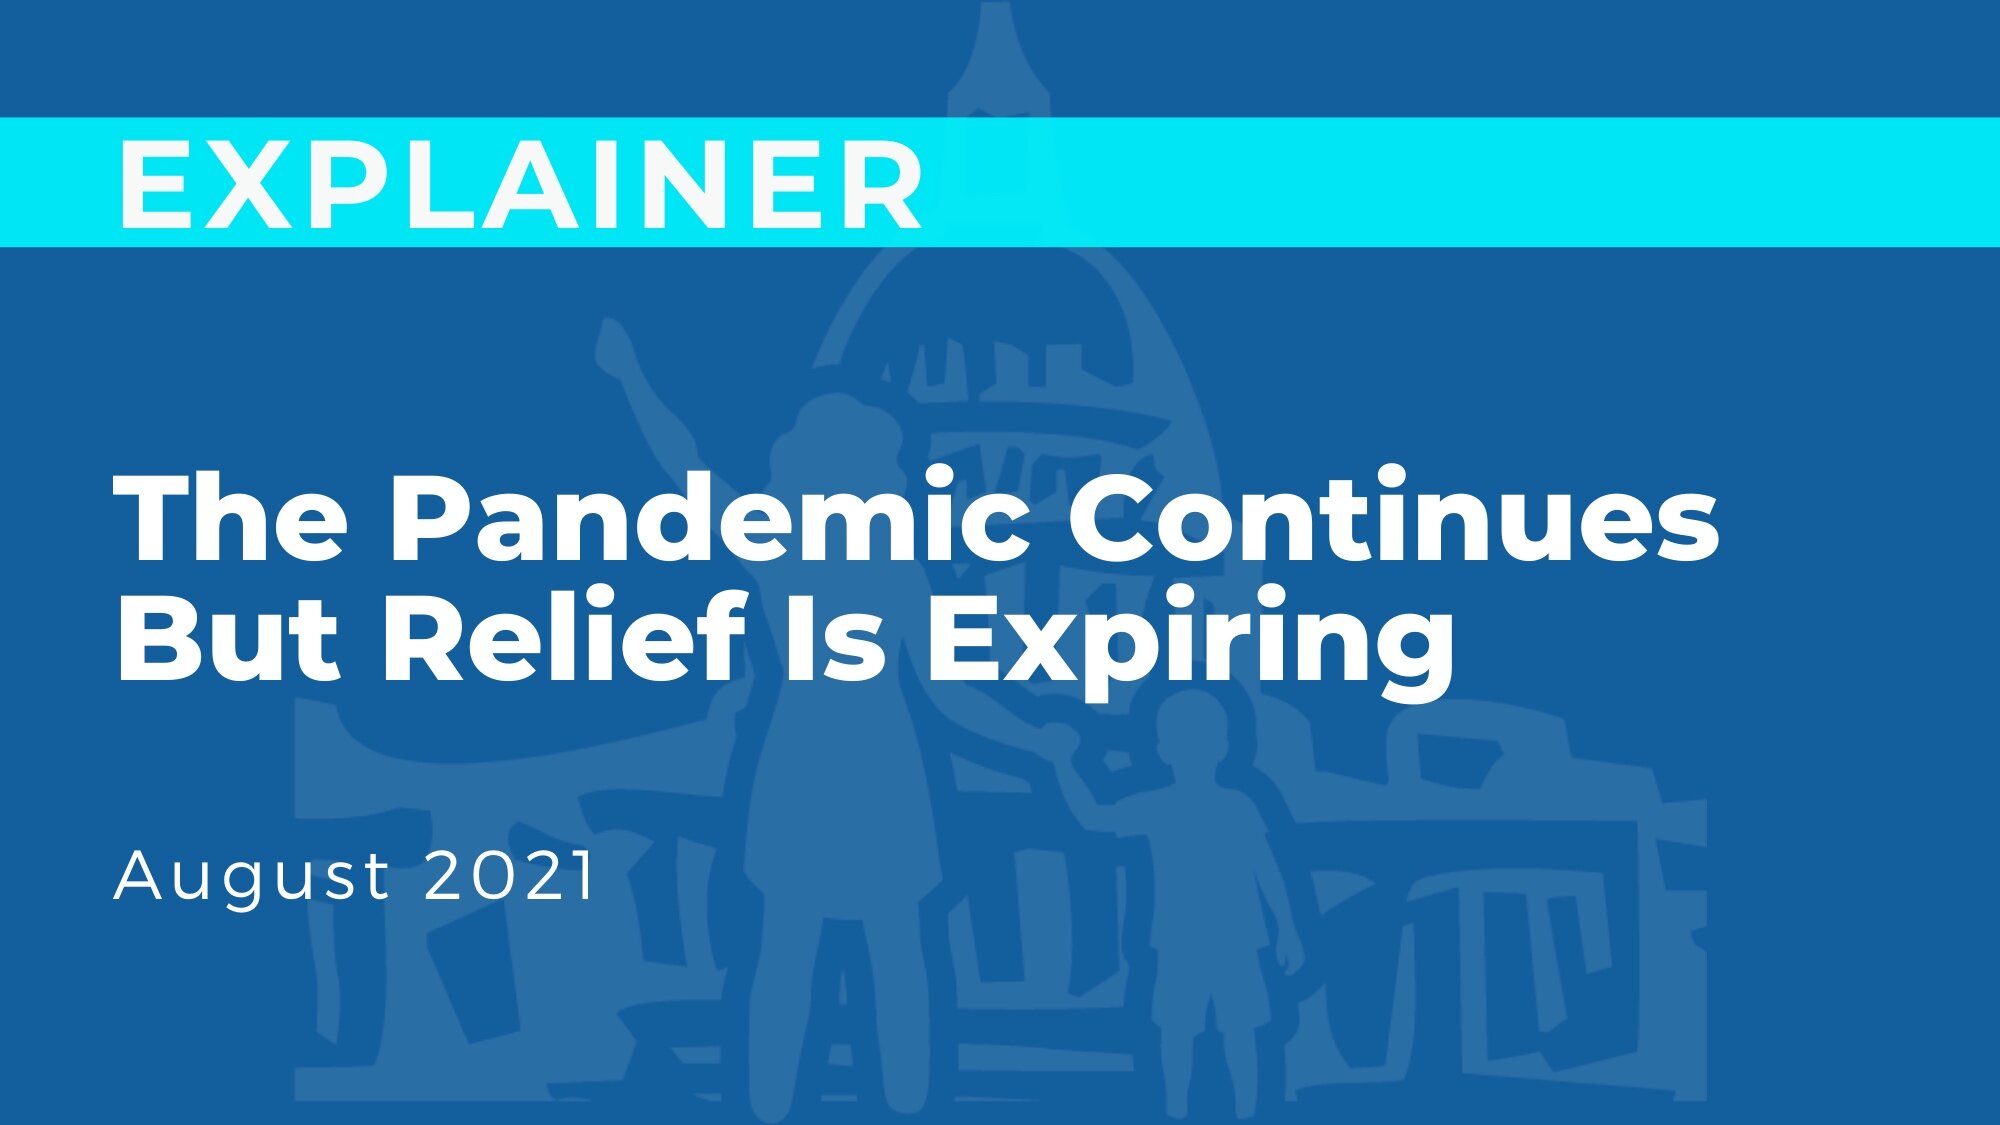 The Pandemic Continues But Relief is Expiring